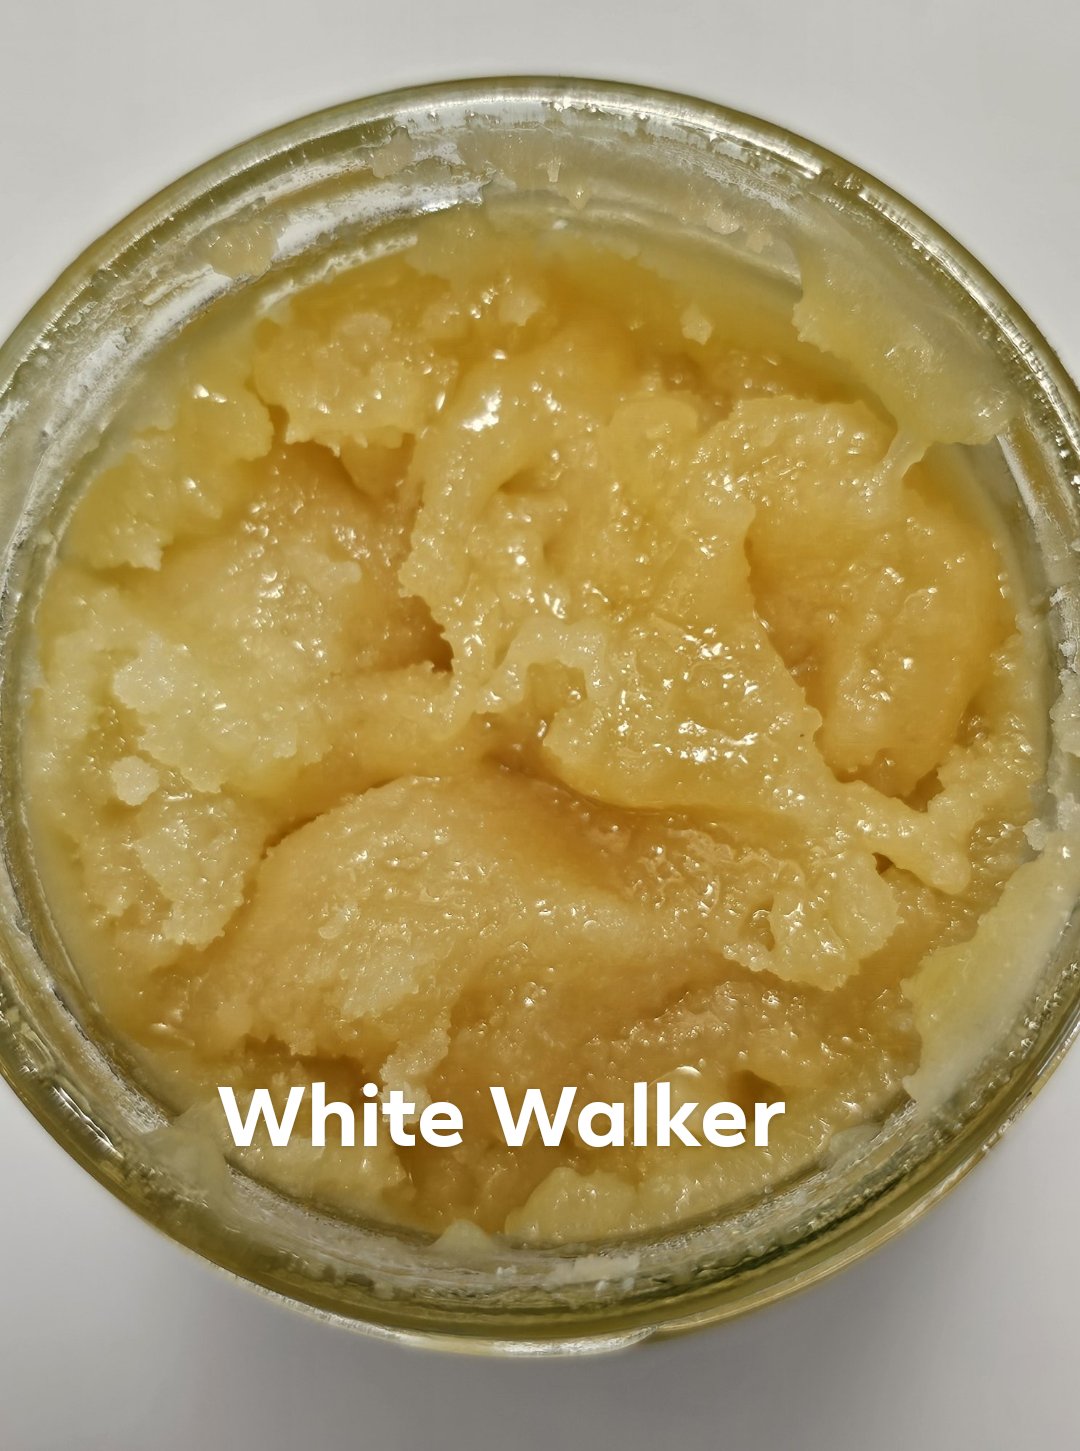 Live Resin 28g Mix and Match